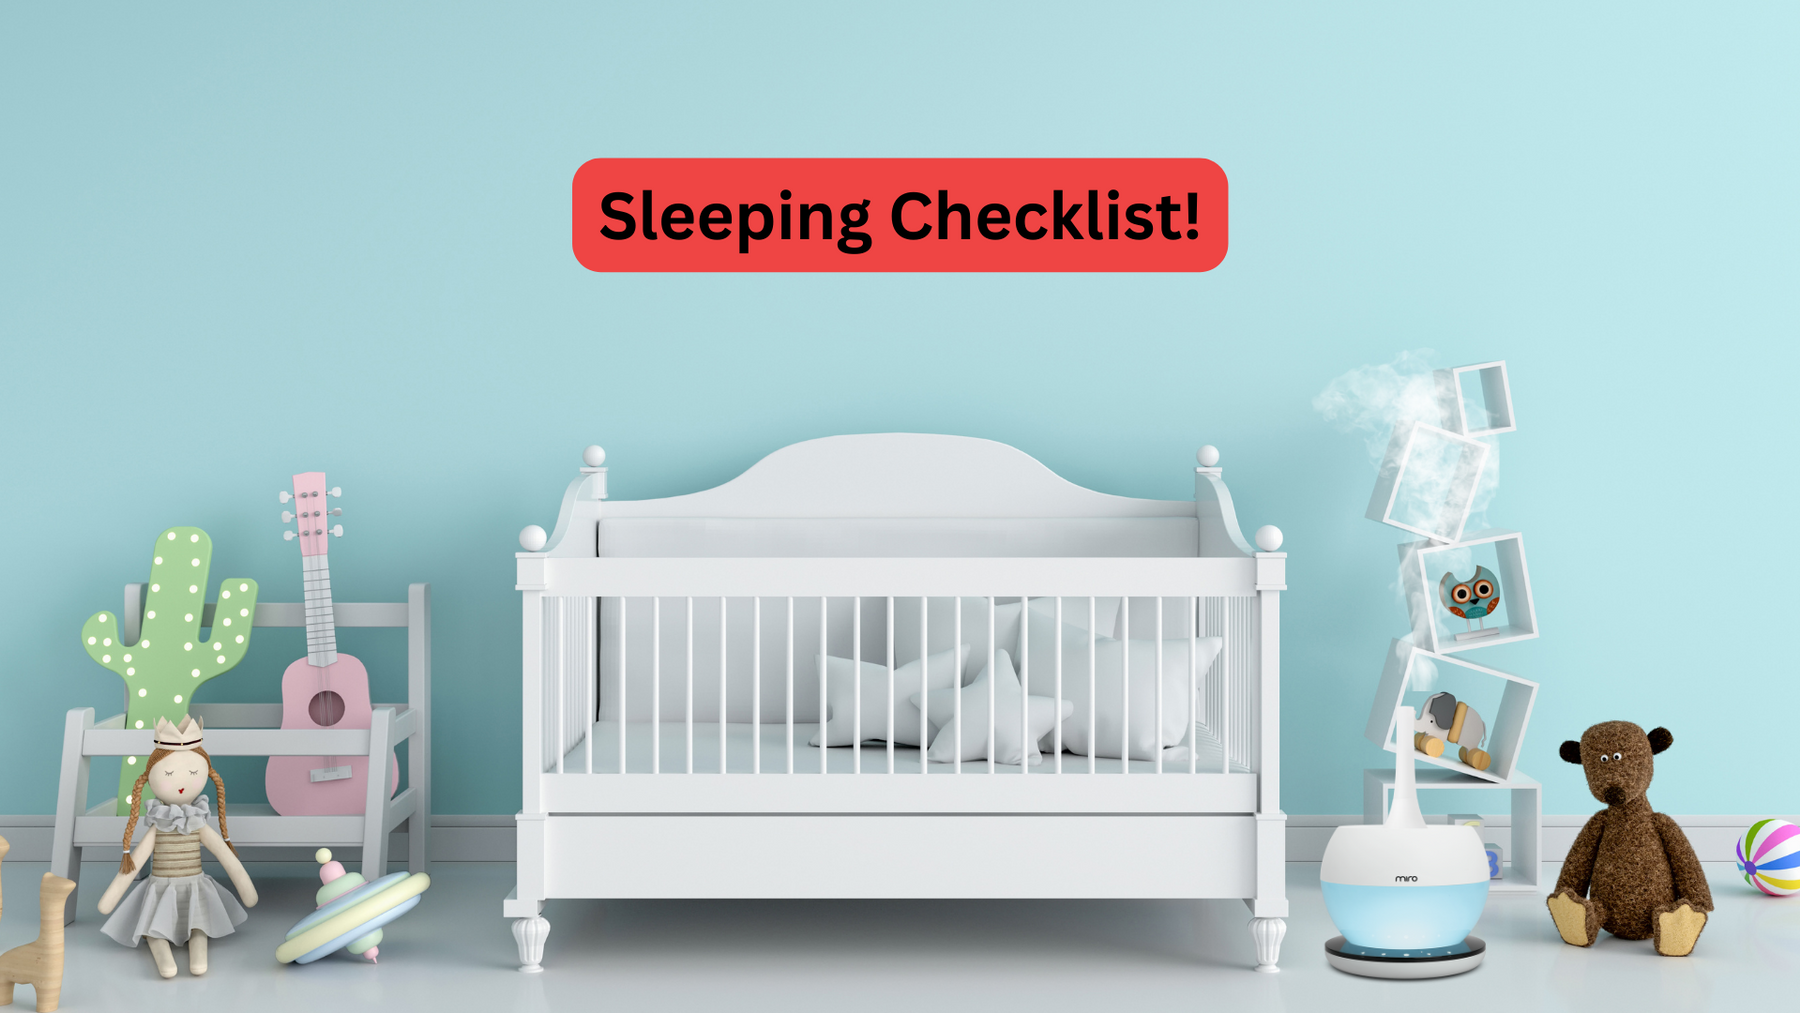 Your Baby's Sleep: Things to Remember